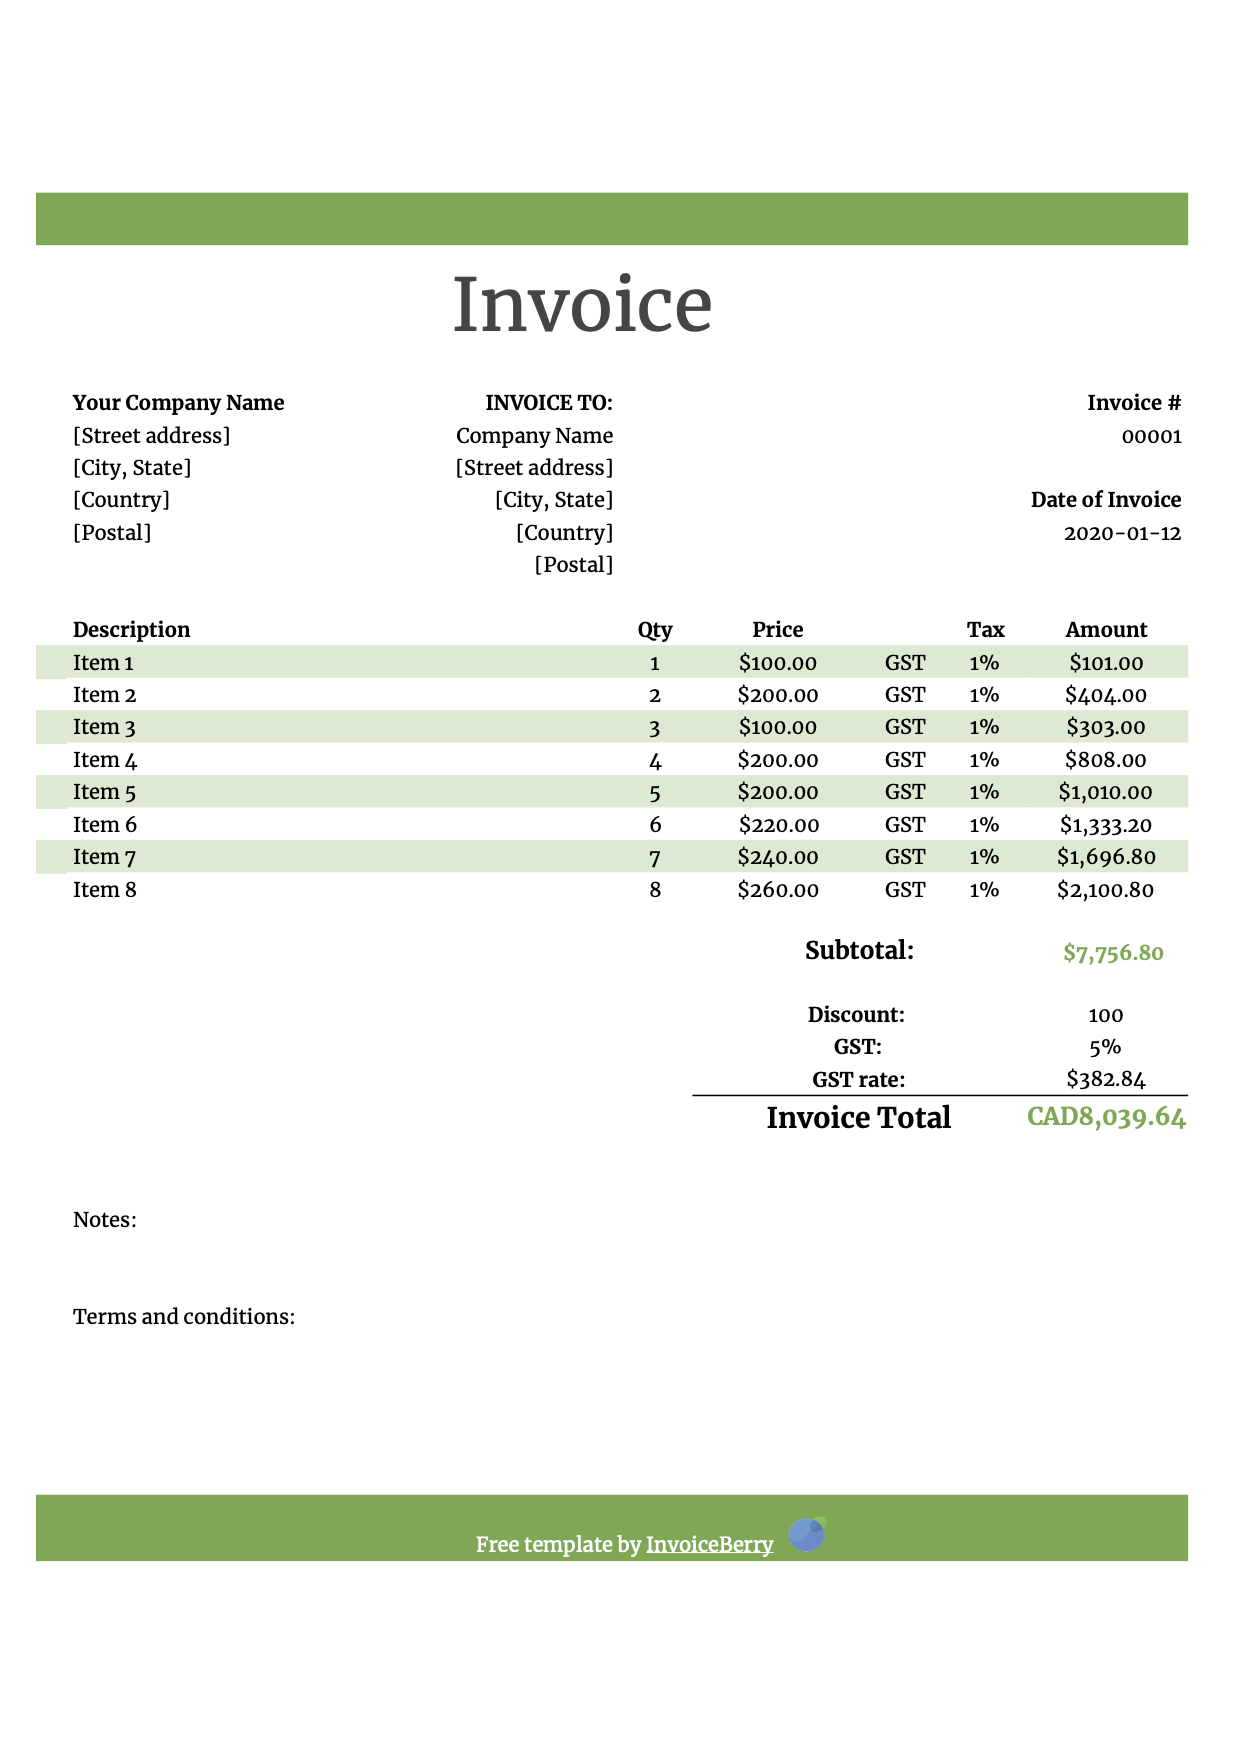 google invoicing software free